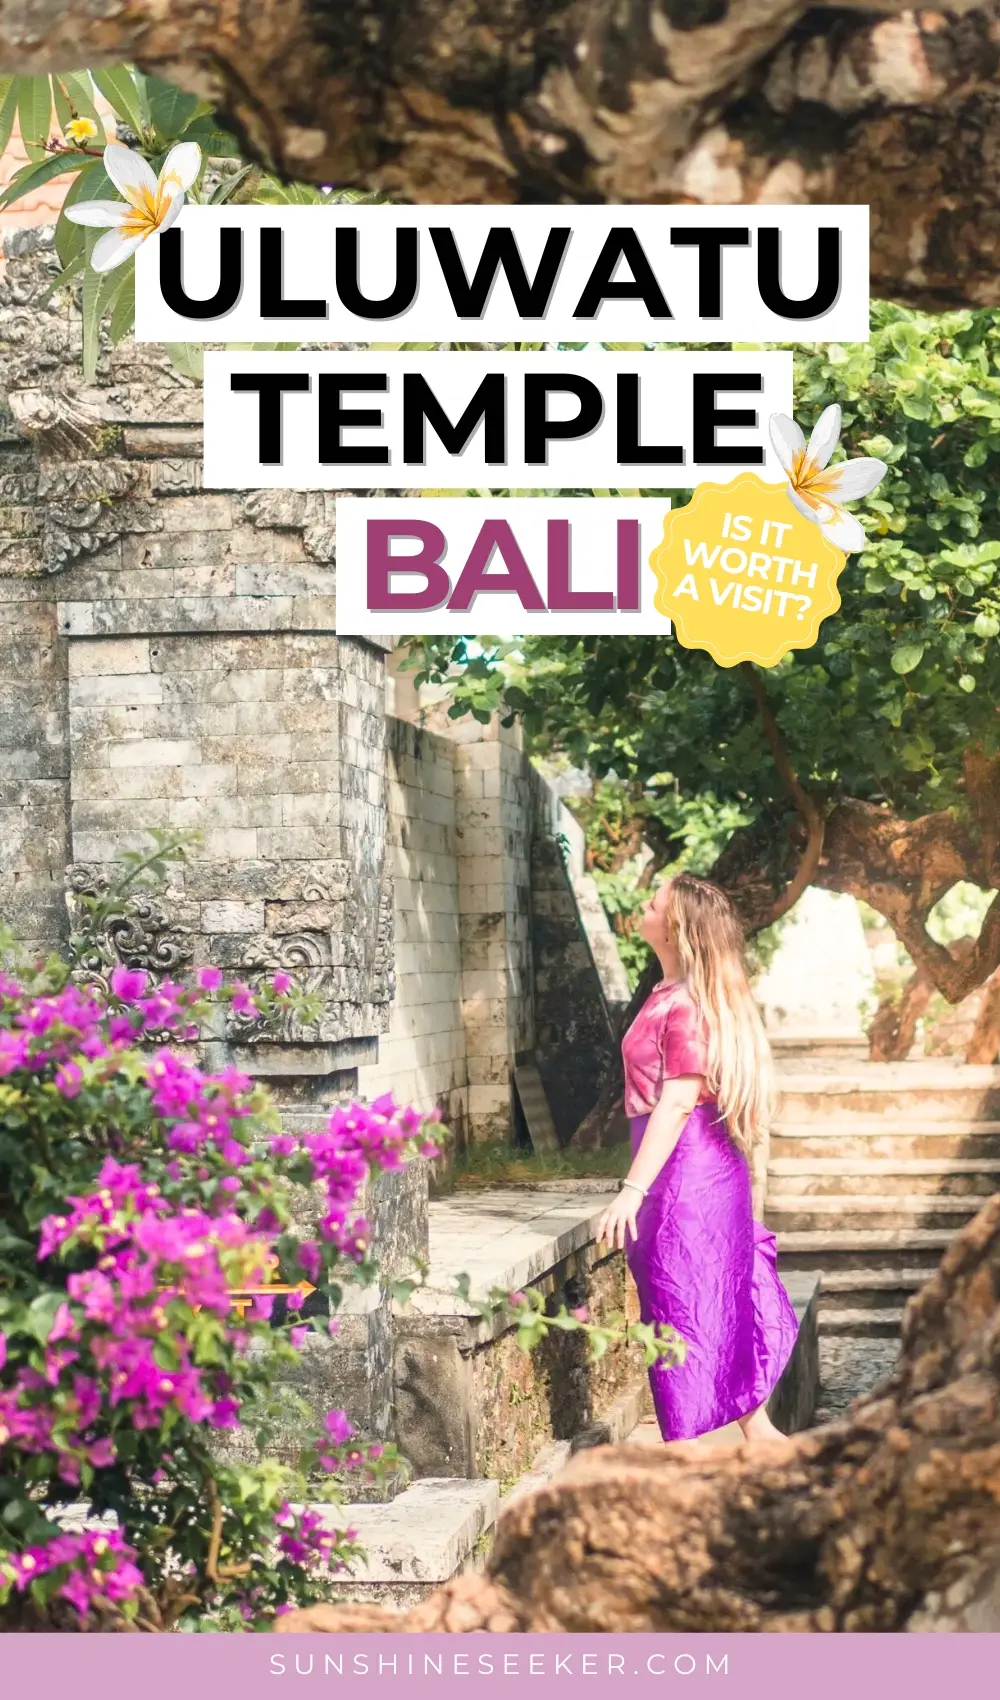 Is the Uluwatu Temple in Bali worth a visit? Click through for a complete guide to Uluwatu Temple, including what to expect and how to stay safe around the monkeys.